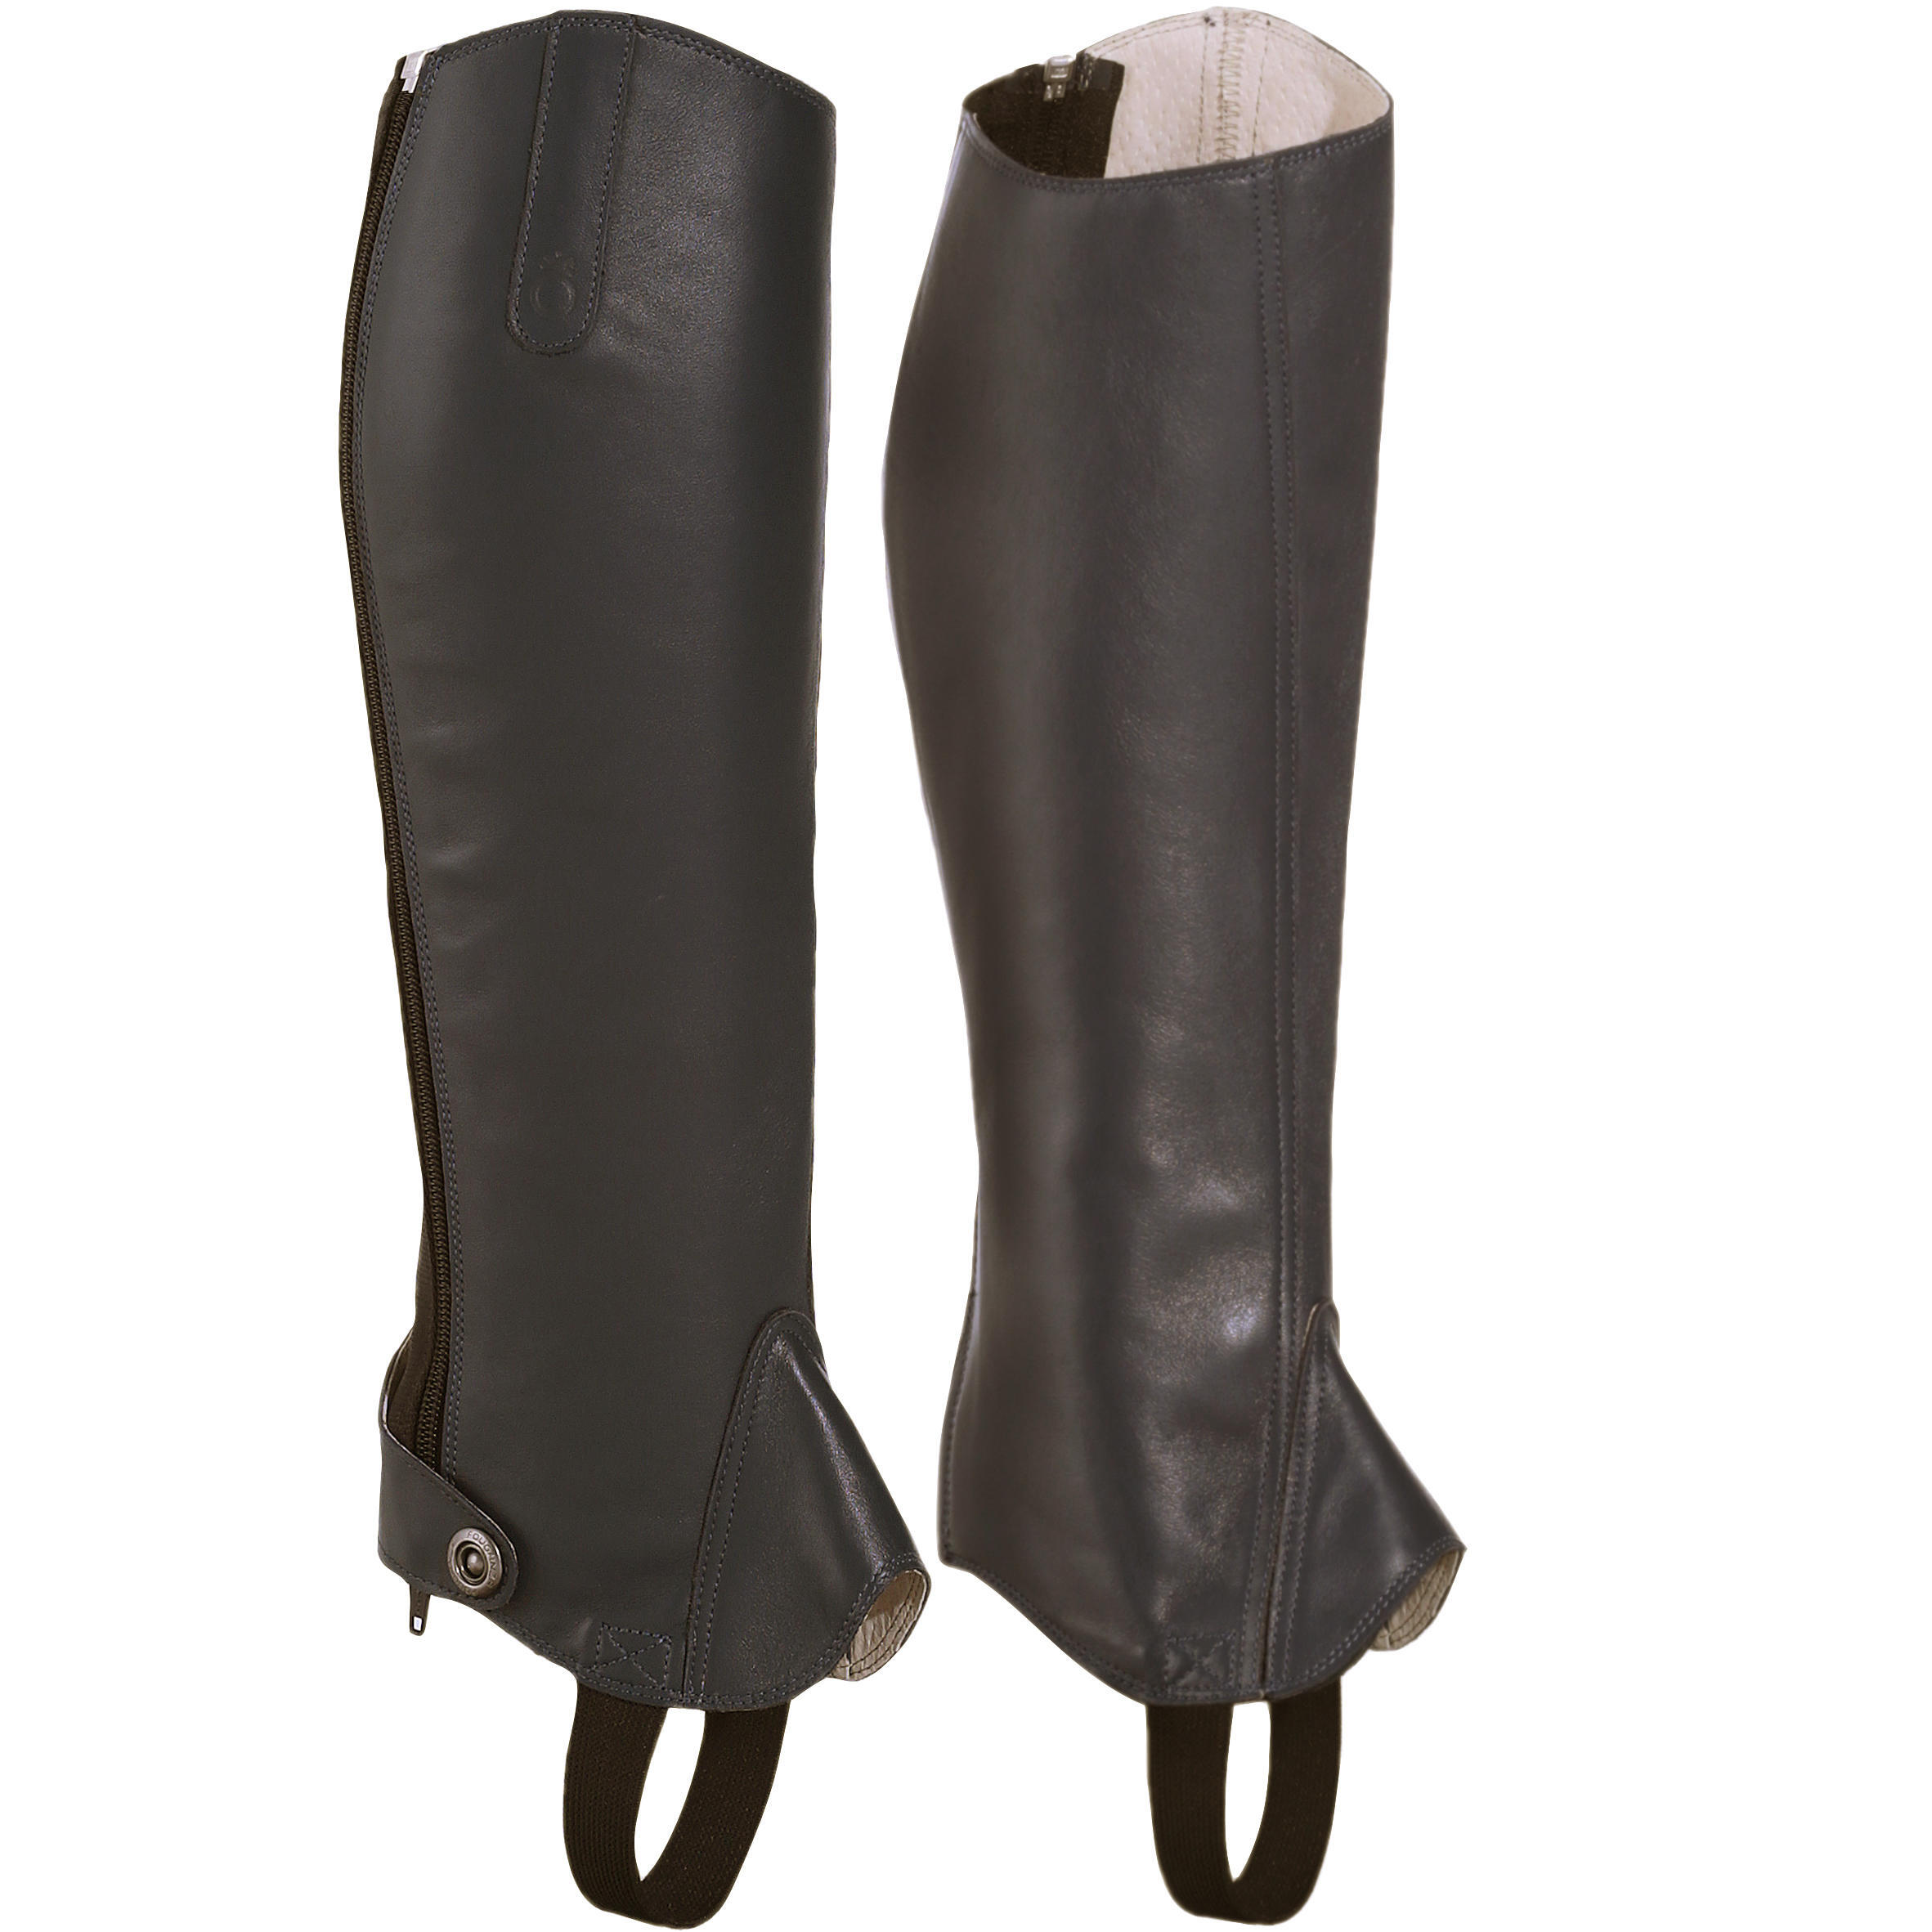 Paddock 700 Adult Horse Riding Leather Half Chaps - Brown 2/10